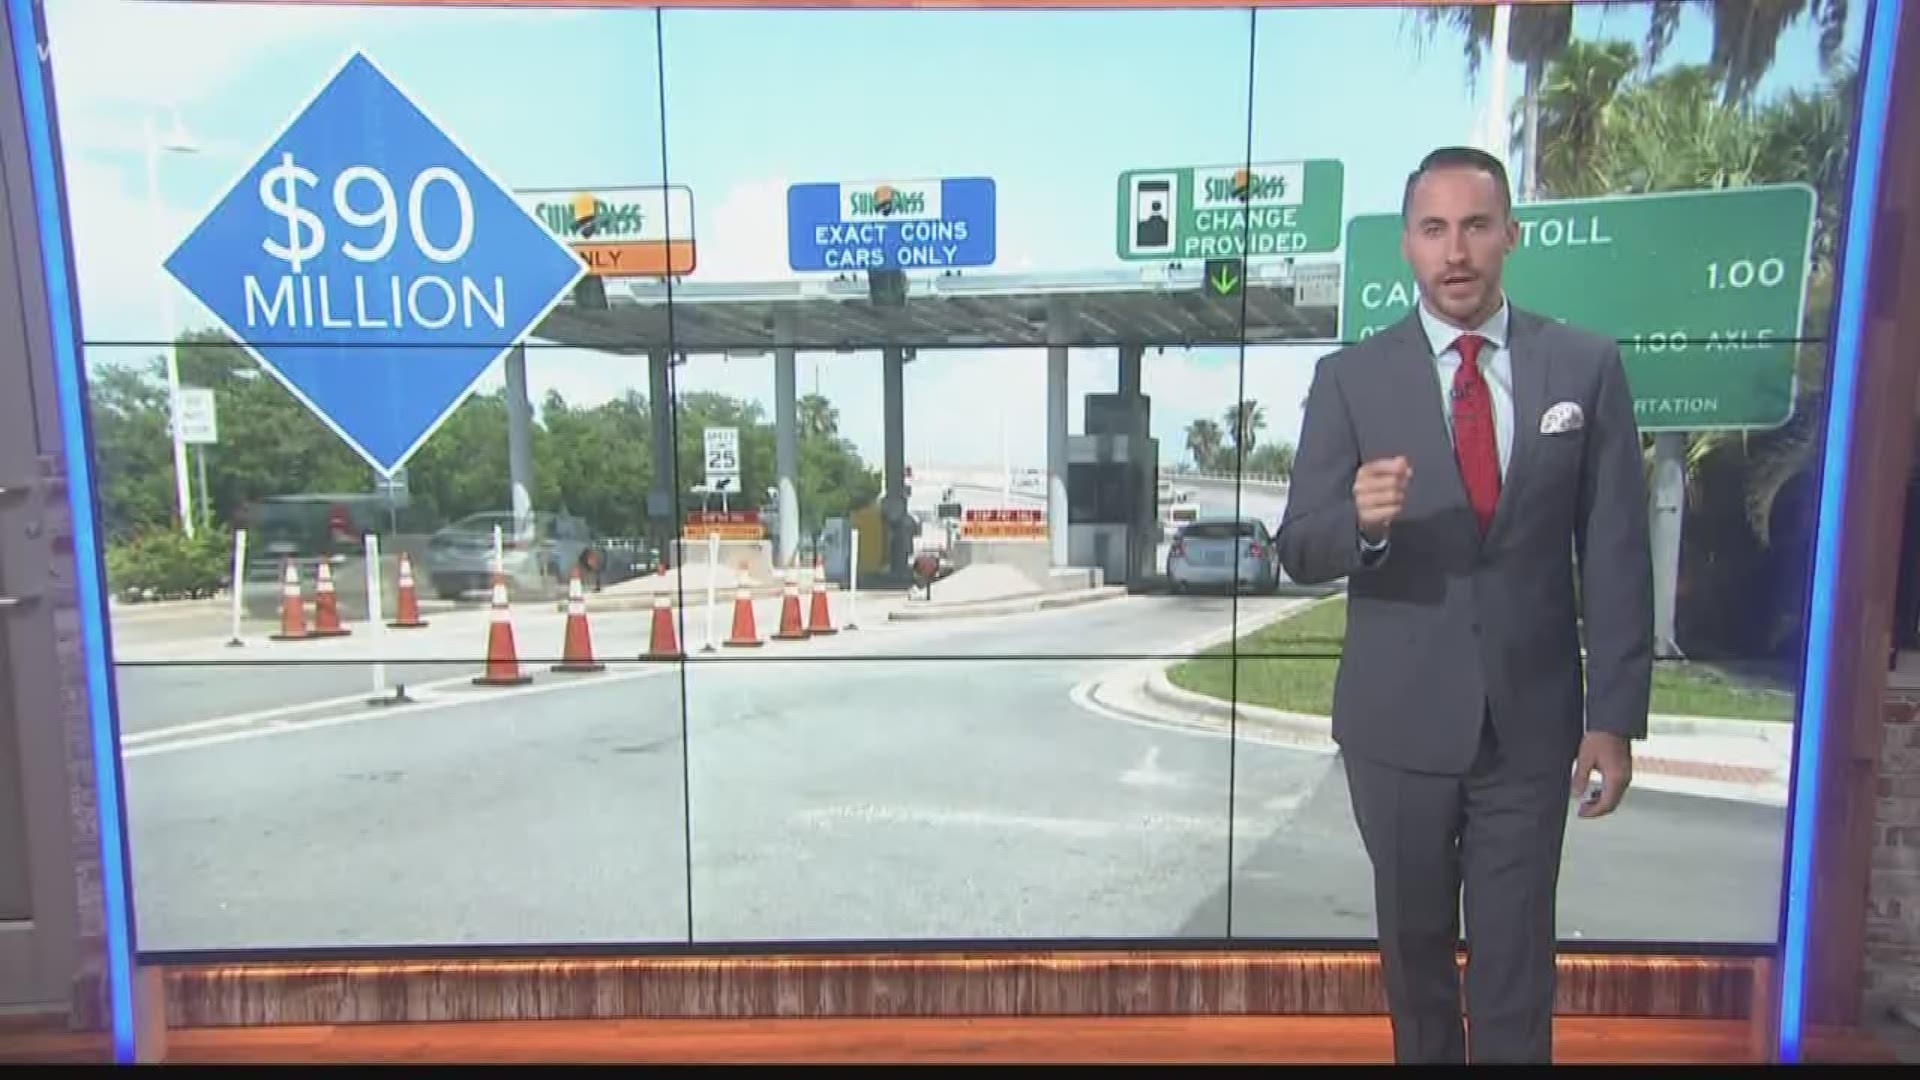 10Investigates has learned there are still millions in unpaid tolls from the period where SunPass was hampered by computer issues. A nationwide immigration sweep netted 35 arrests. A Clearwater officer wants to raise $1,500 to help a homeowner pay for damage caused by a gator to the inside of her home.